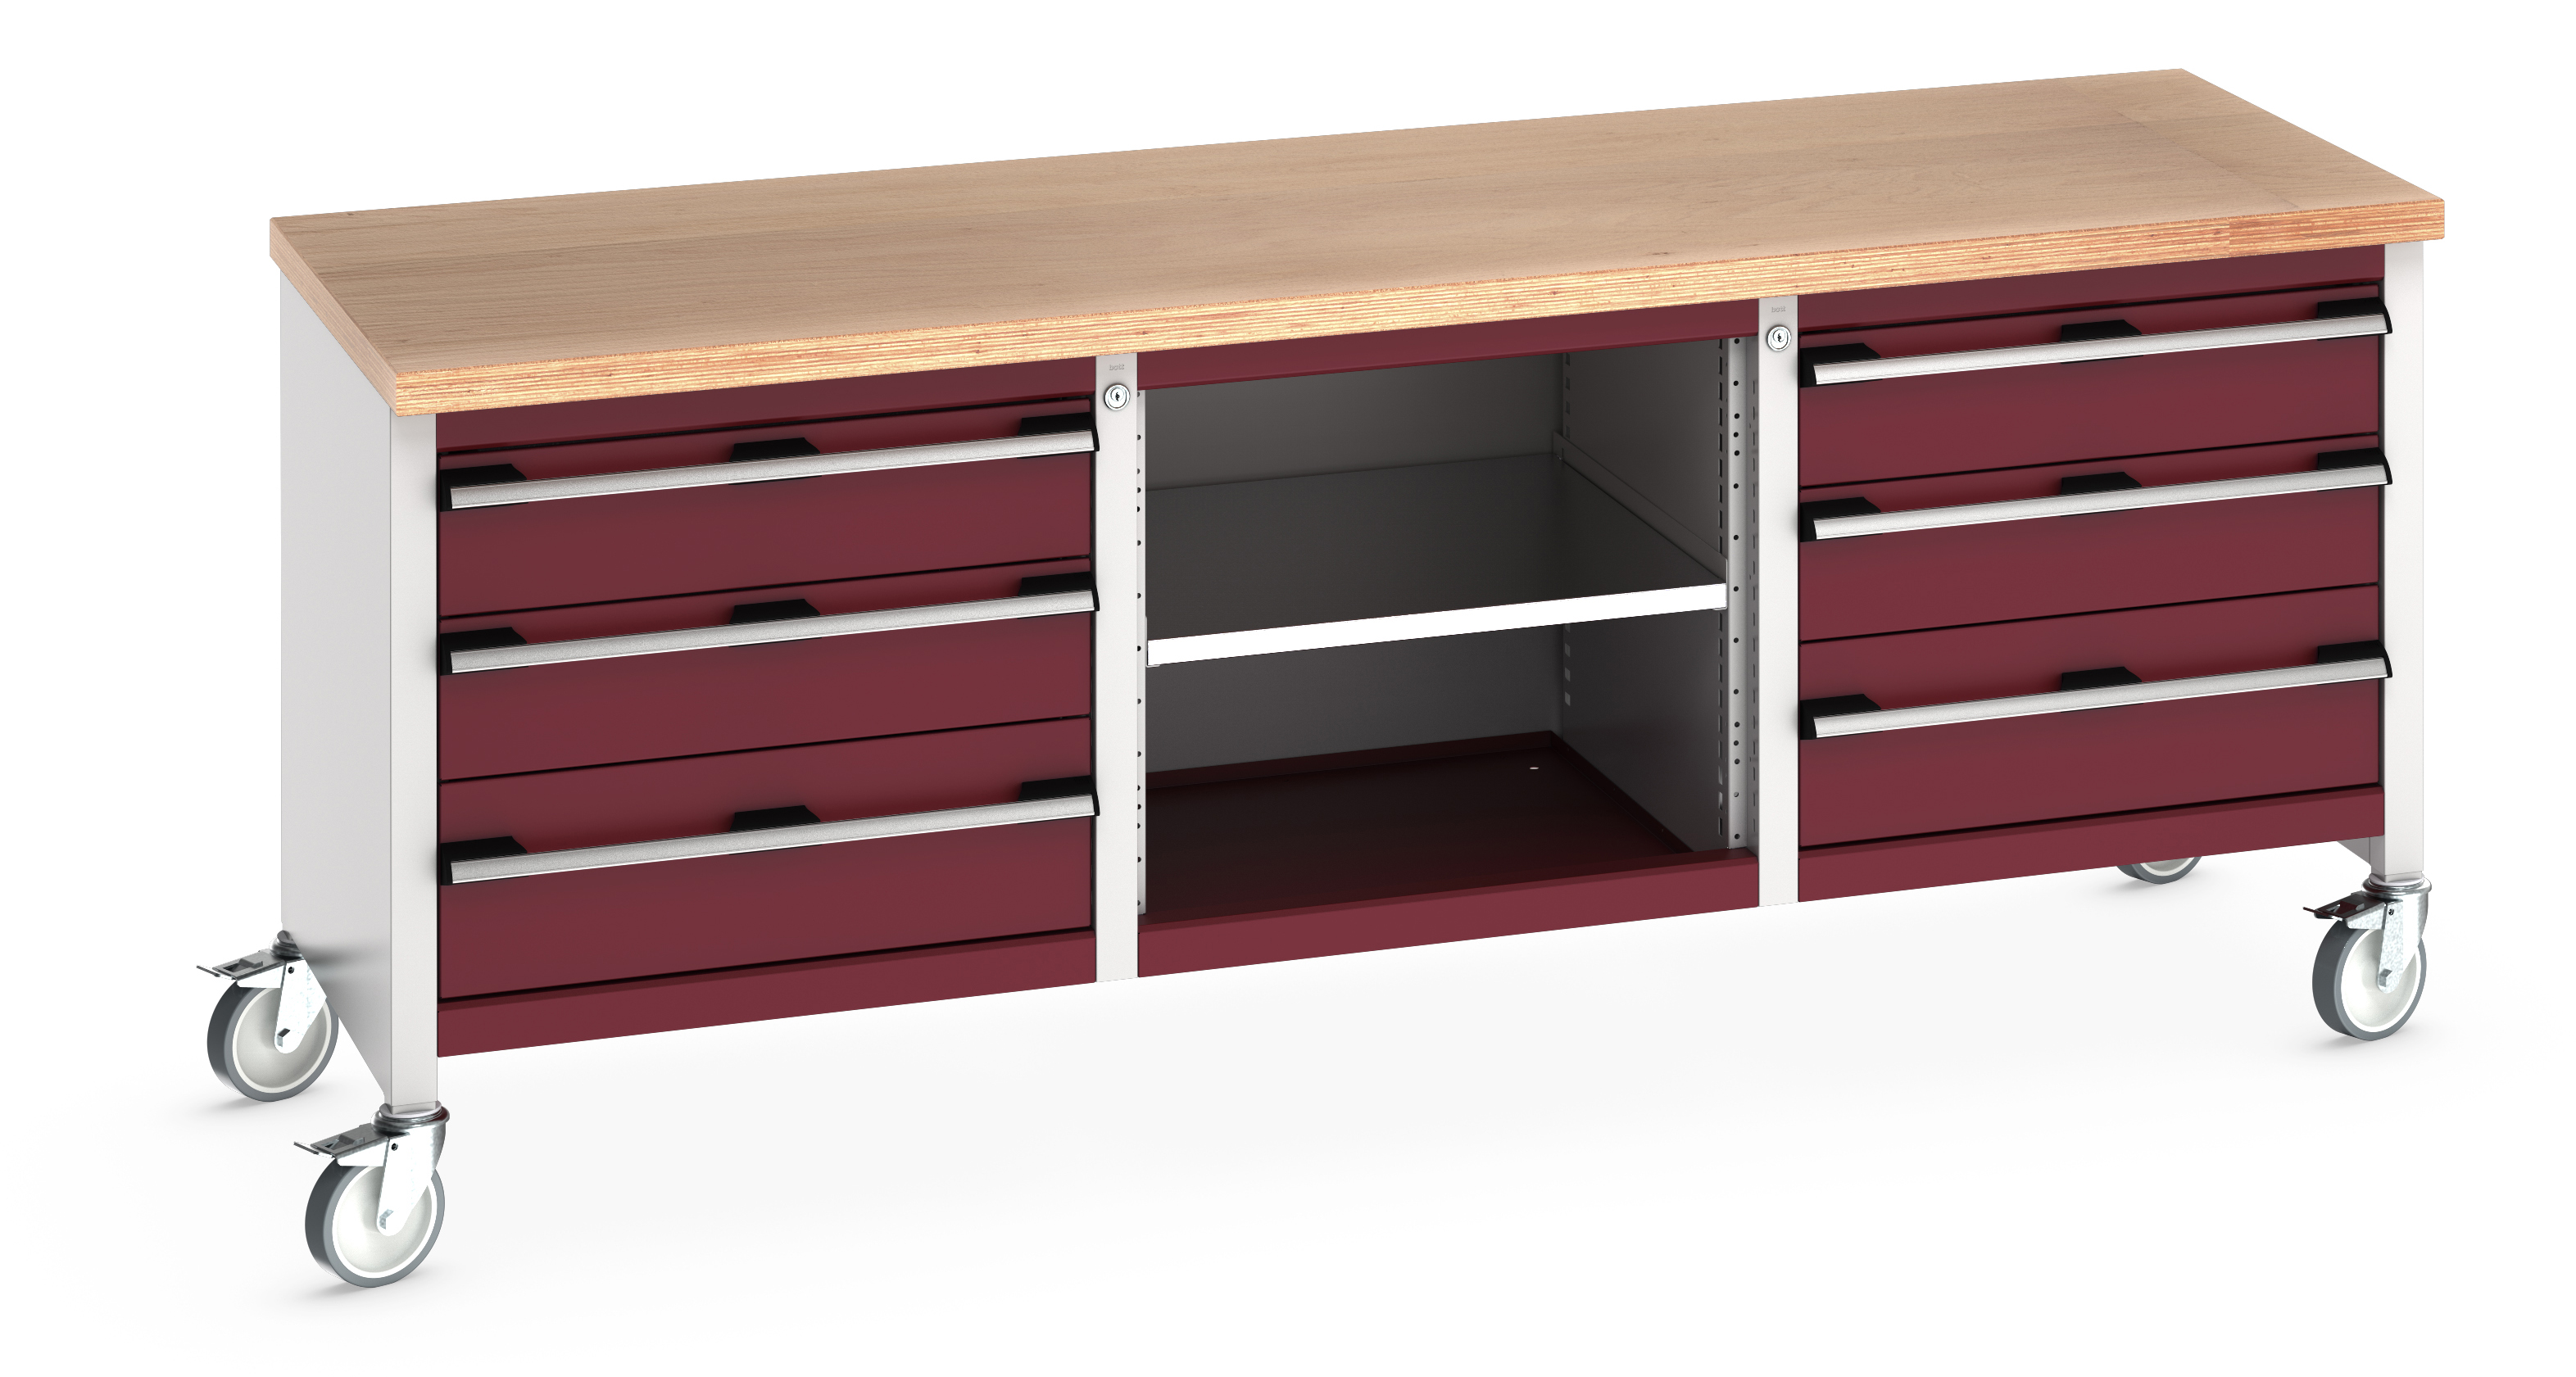 Bott Cubio Mobile Storage Bench With 3 Drawer Cabinet / Open Cupboard / 3 Drawer Cabinet - 41002130.24V